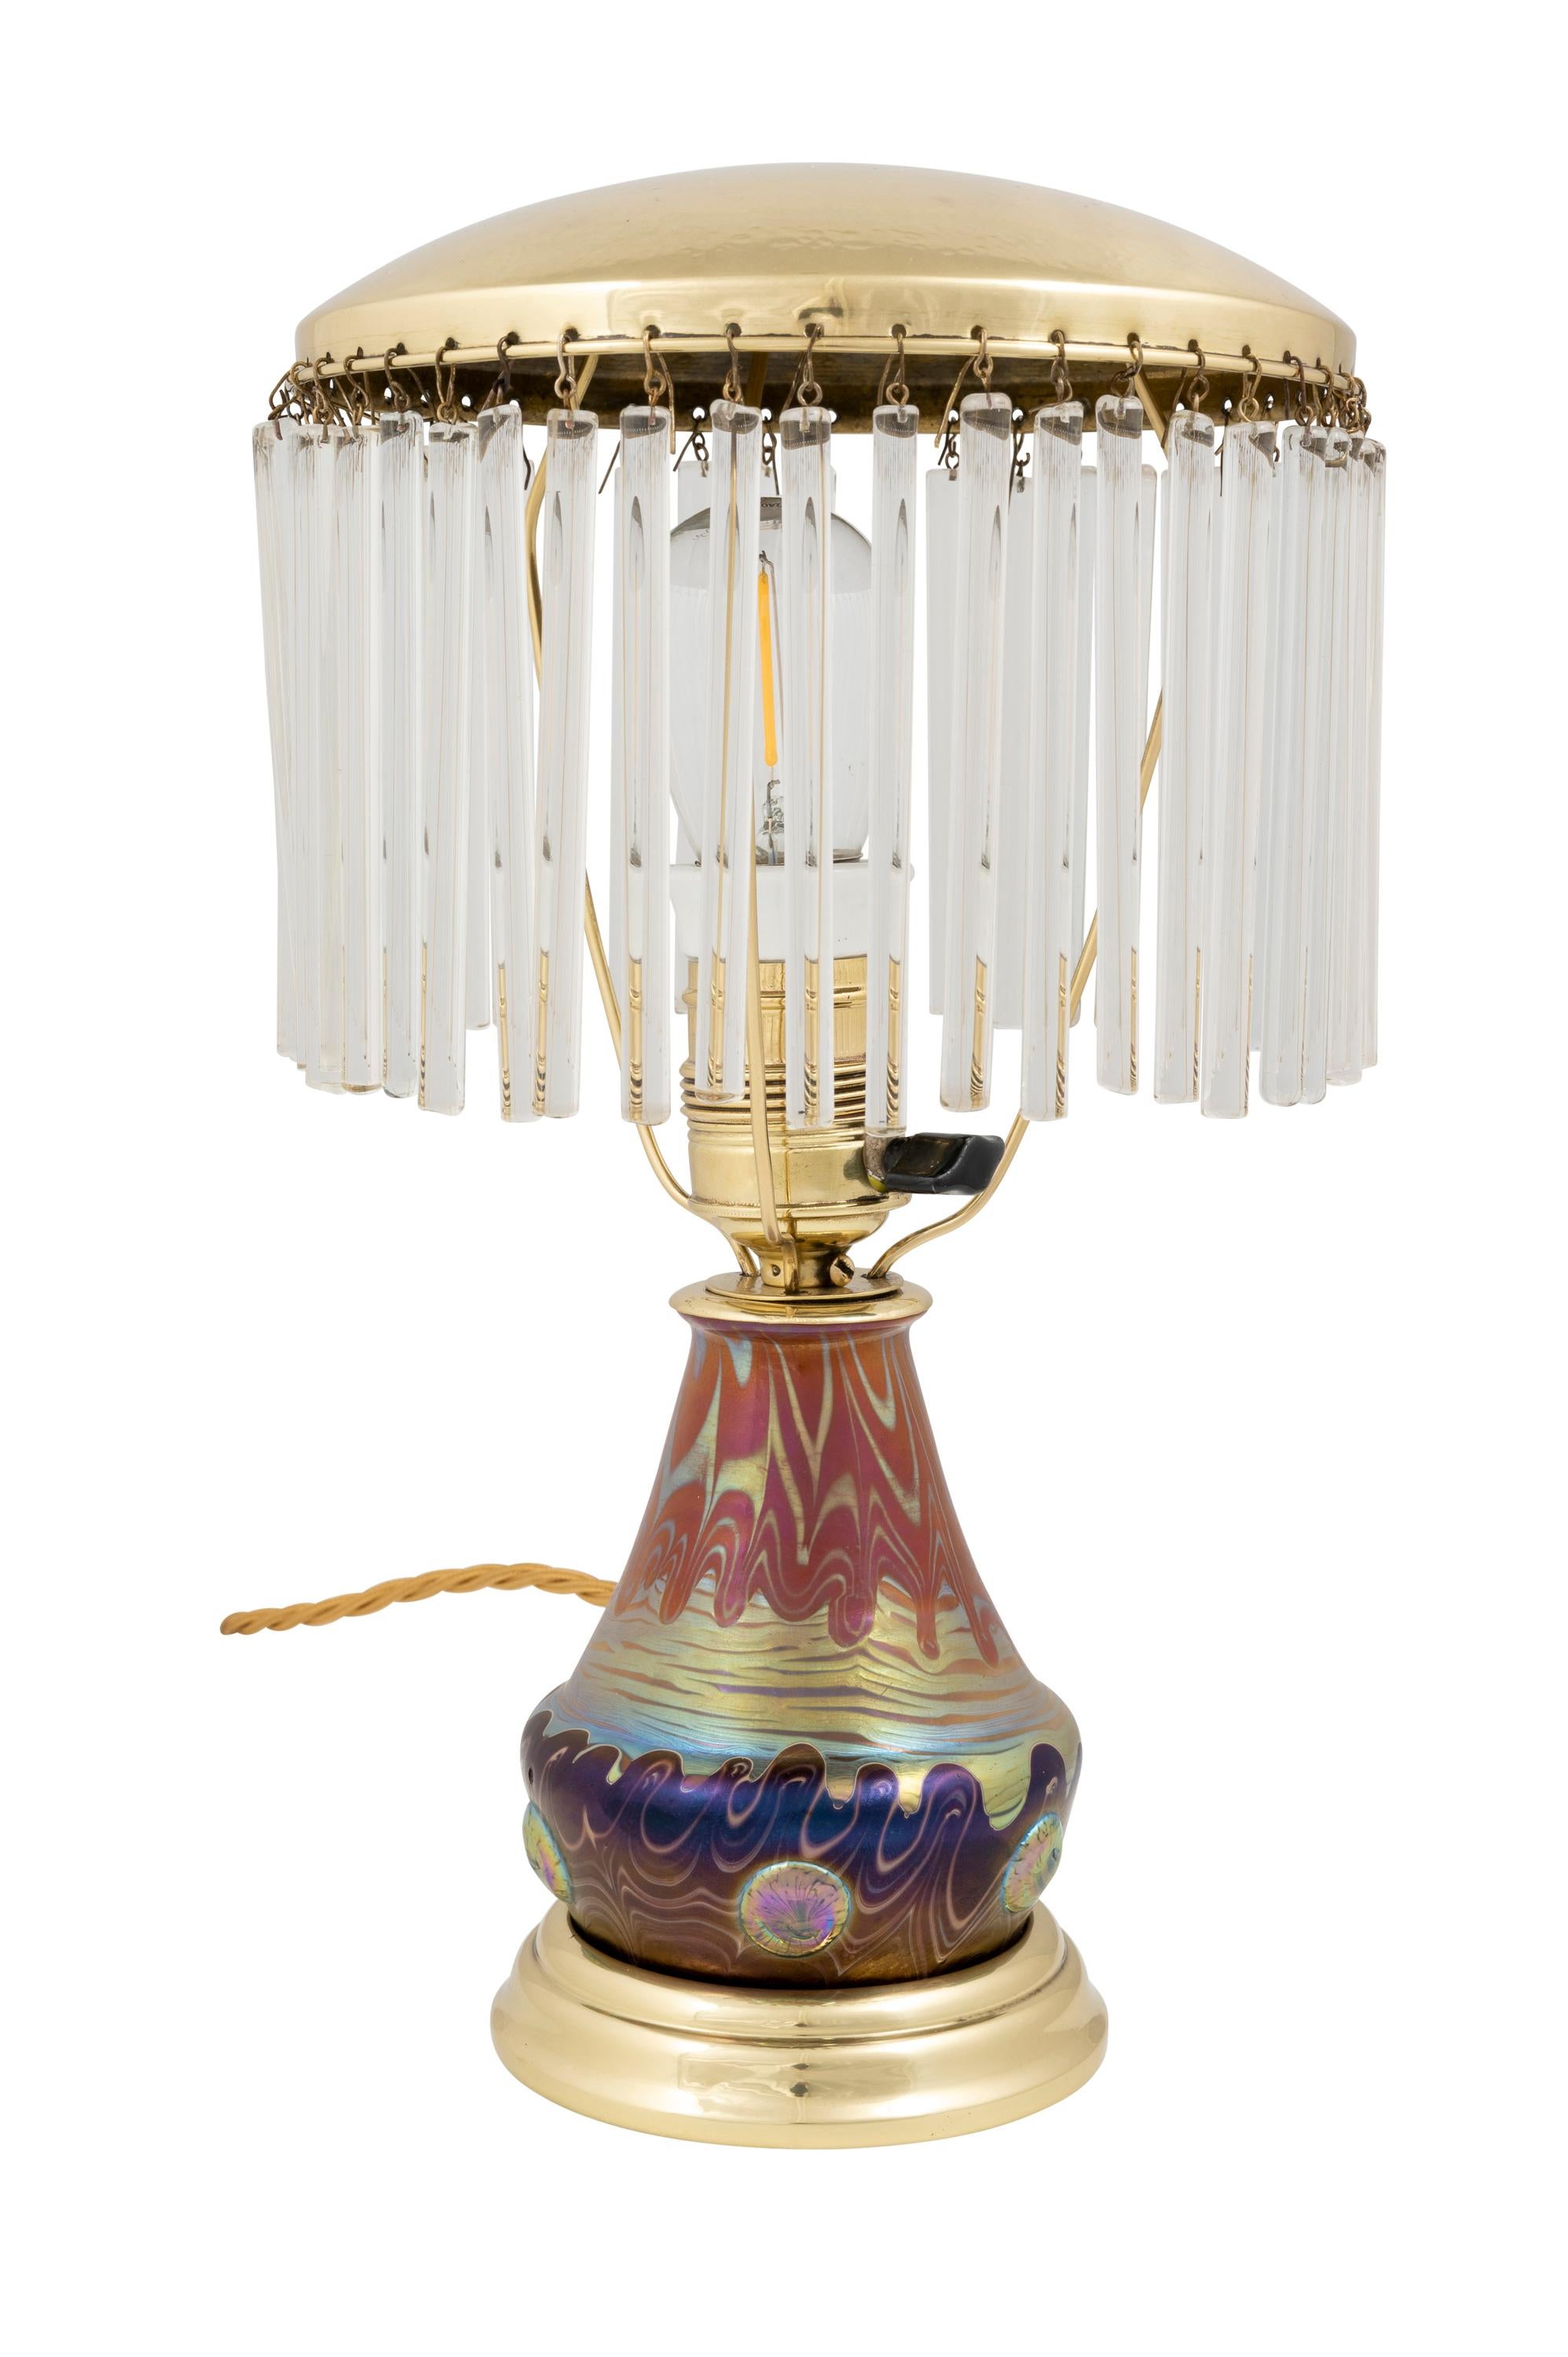 Table lamp with glass rods, manufactured by Johann Loetz Witwe, Phenomen Genre 358 decoration, circa 1901

This table lamp is an extraordinary example of the Loetz manufactory its capability for design. The Phenomen Genre 358 decoration is known